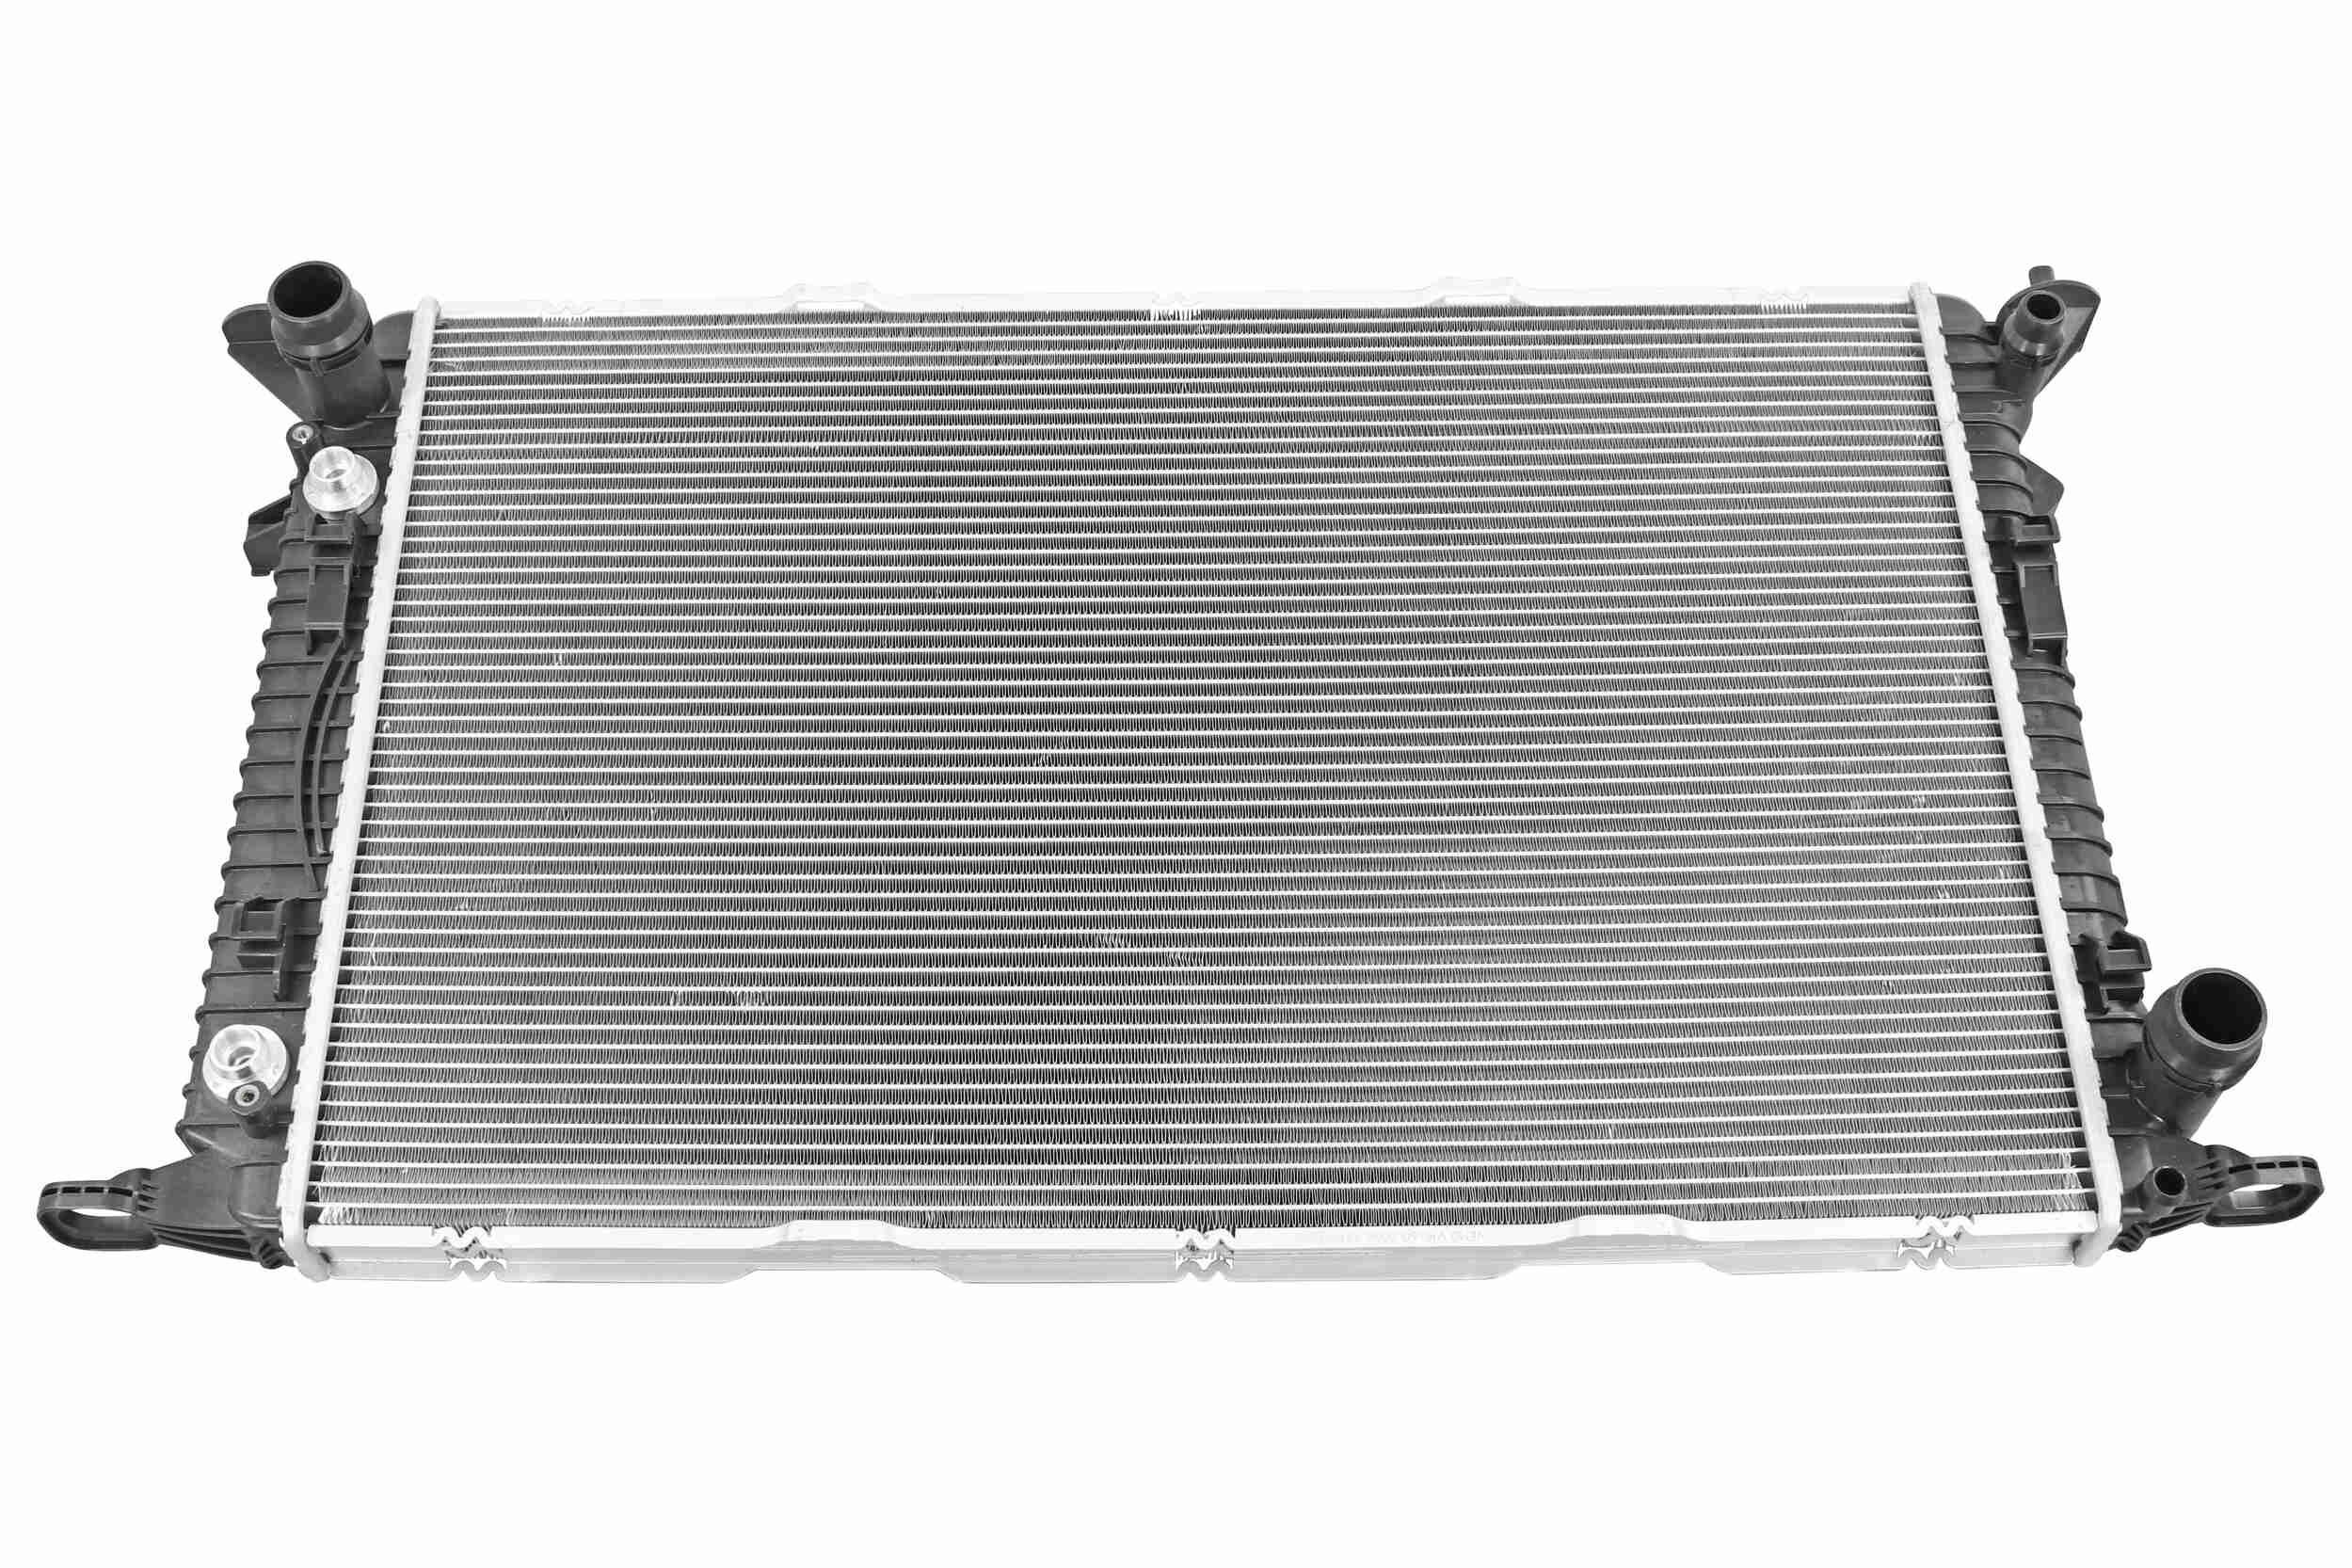 VEMO V10-60-0006 Engine radiator for vehicles with/without air conditioning, 720 x 474 x 36 mm, Q+, original equipment manufacturer quality, Automatic Transmission